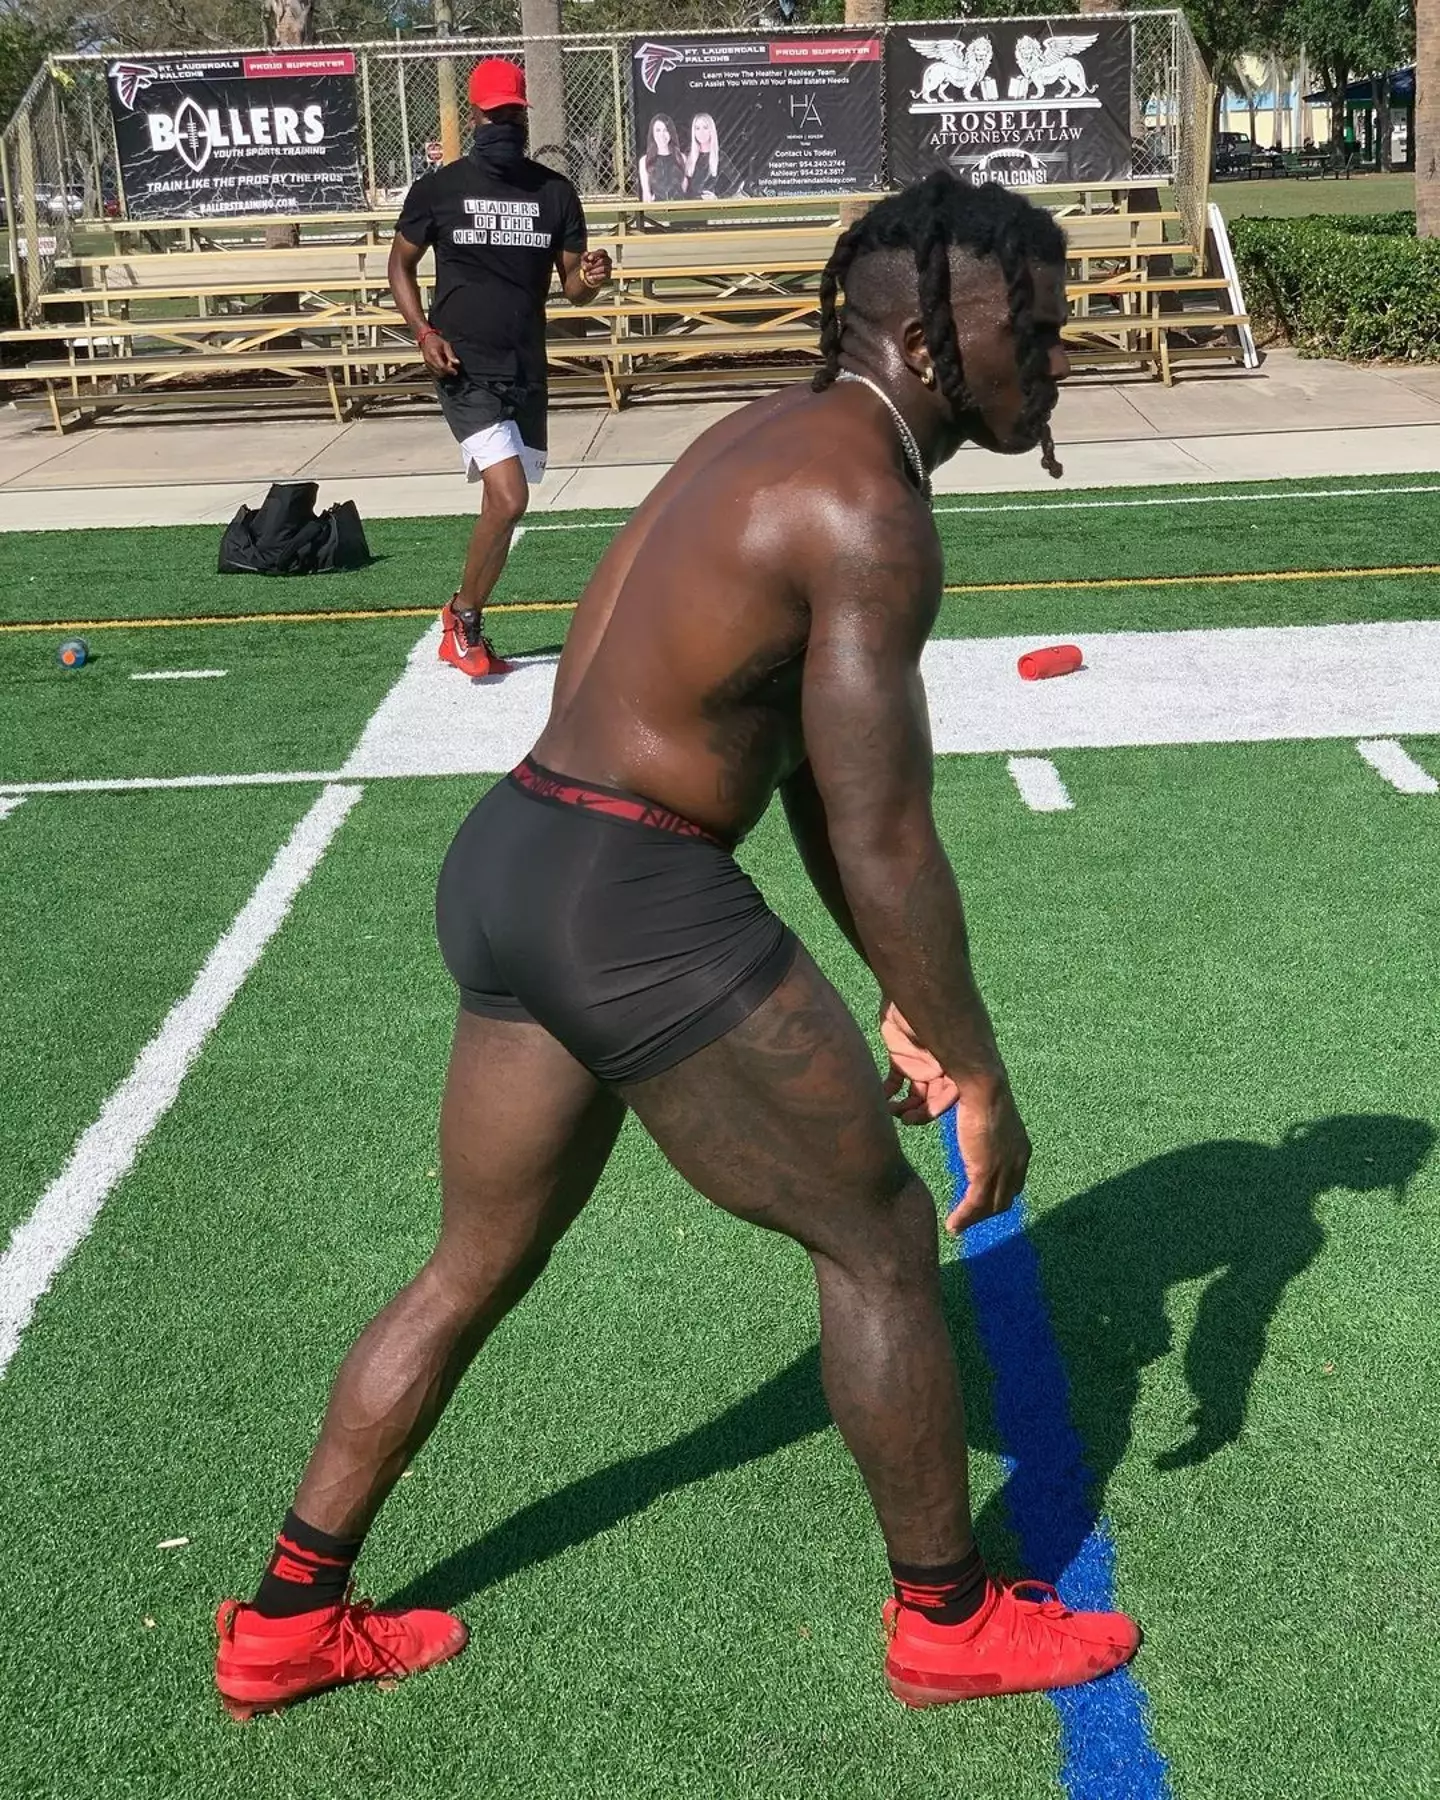 Tyreek Hill said he wants to be a porn star when he retires from the NFL.